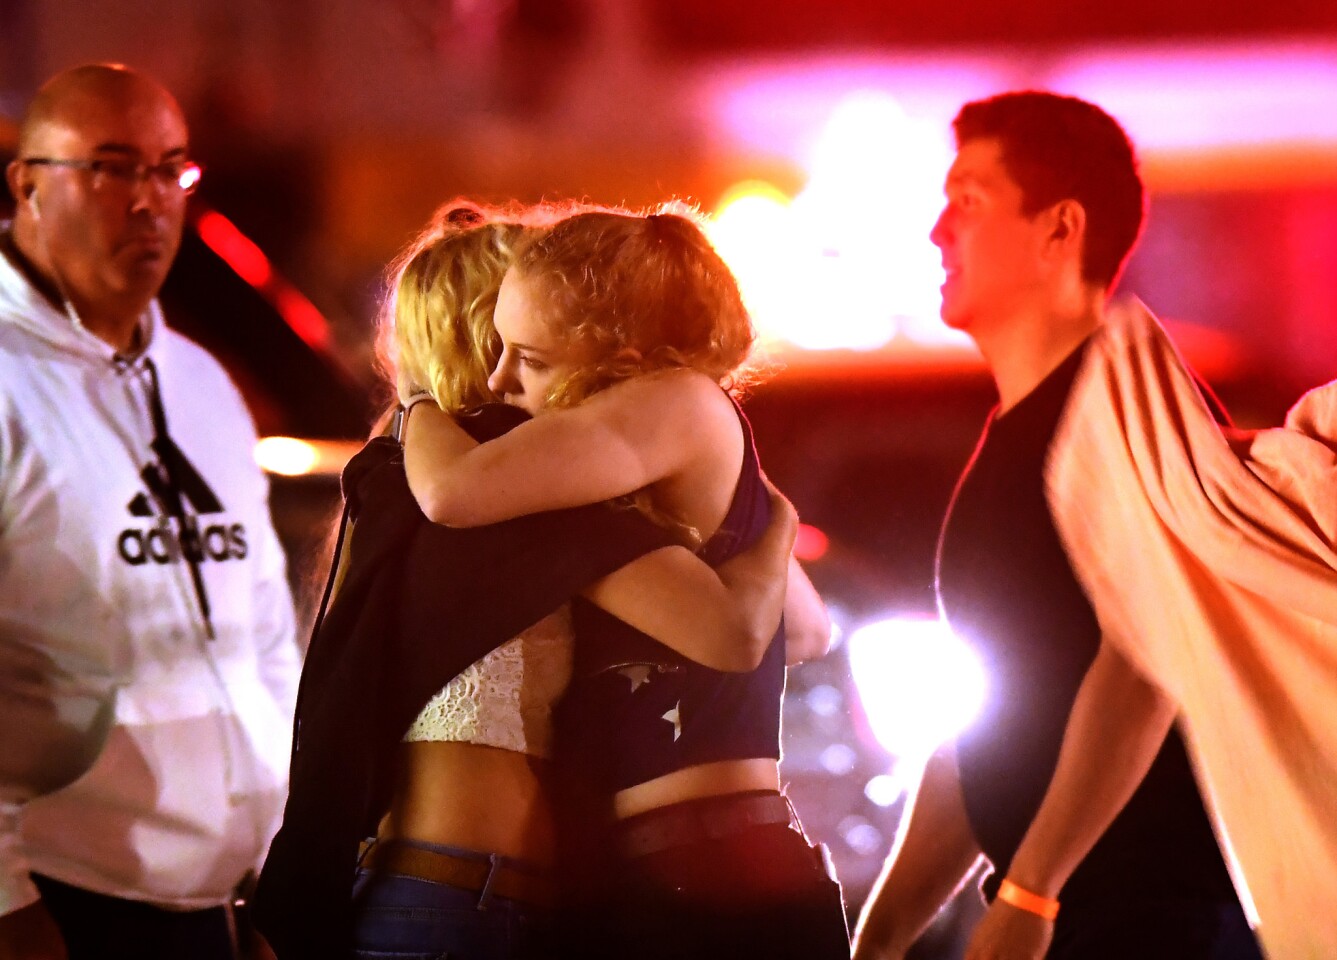 People comfort each other after a mass shooting at the Borderline Bar & Grill in Thousand Oaks late Wednesday night.